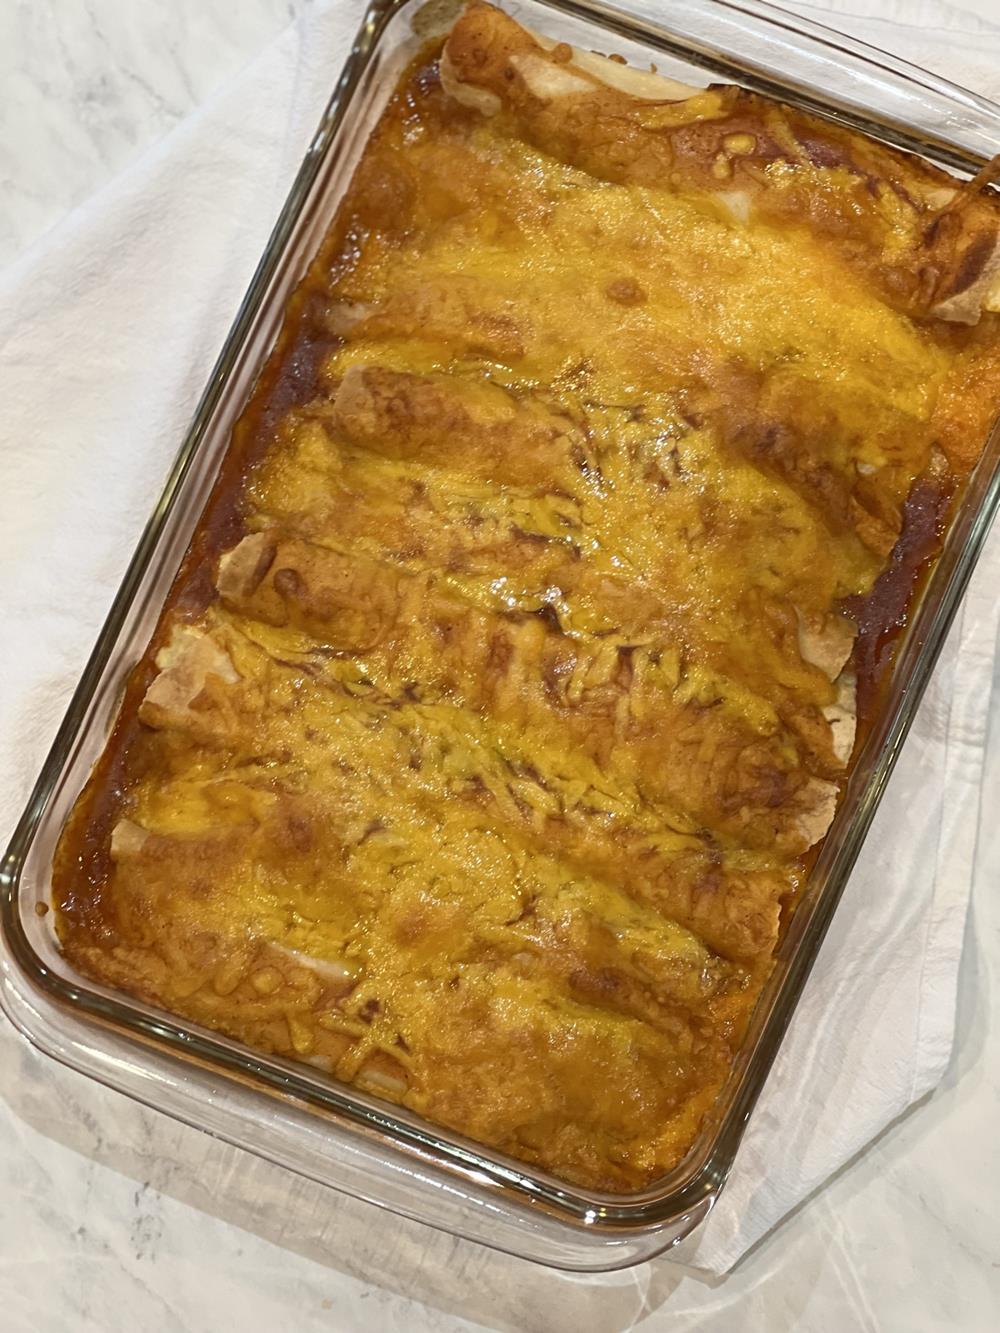 cooked enchiladas with red sauce and cheese in glass pan